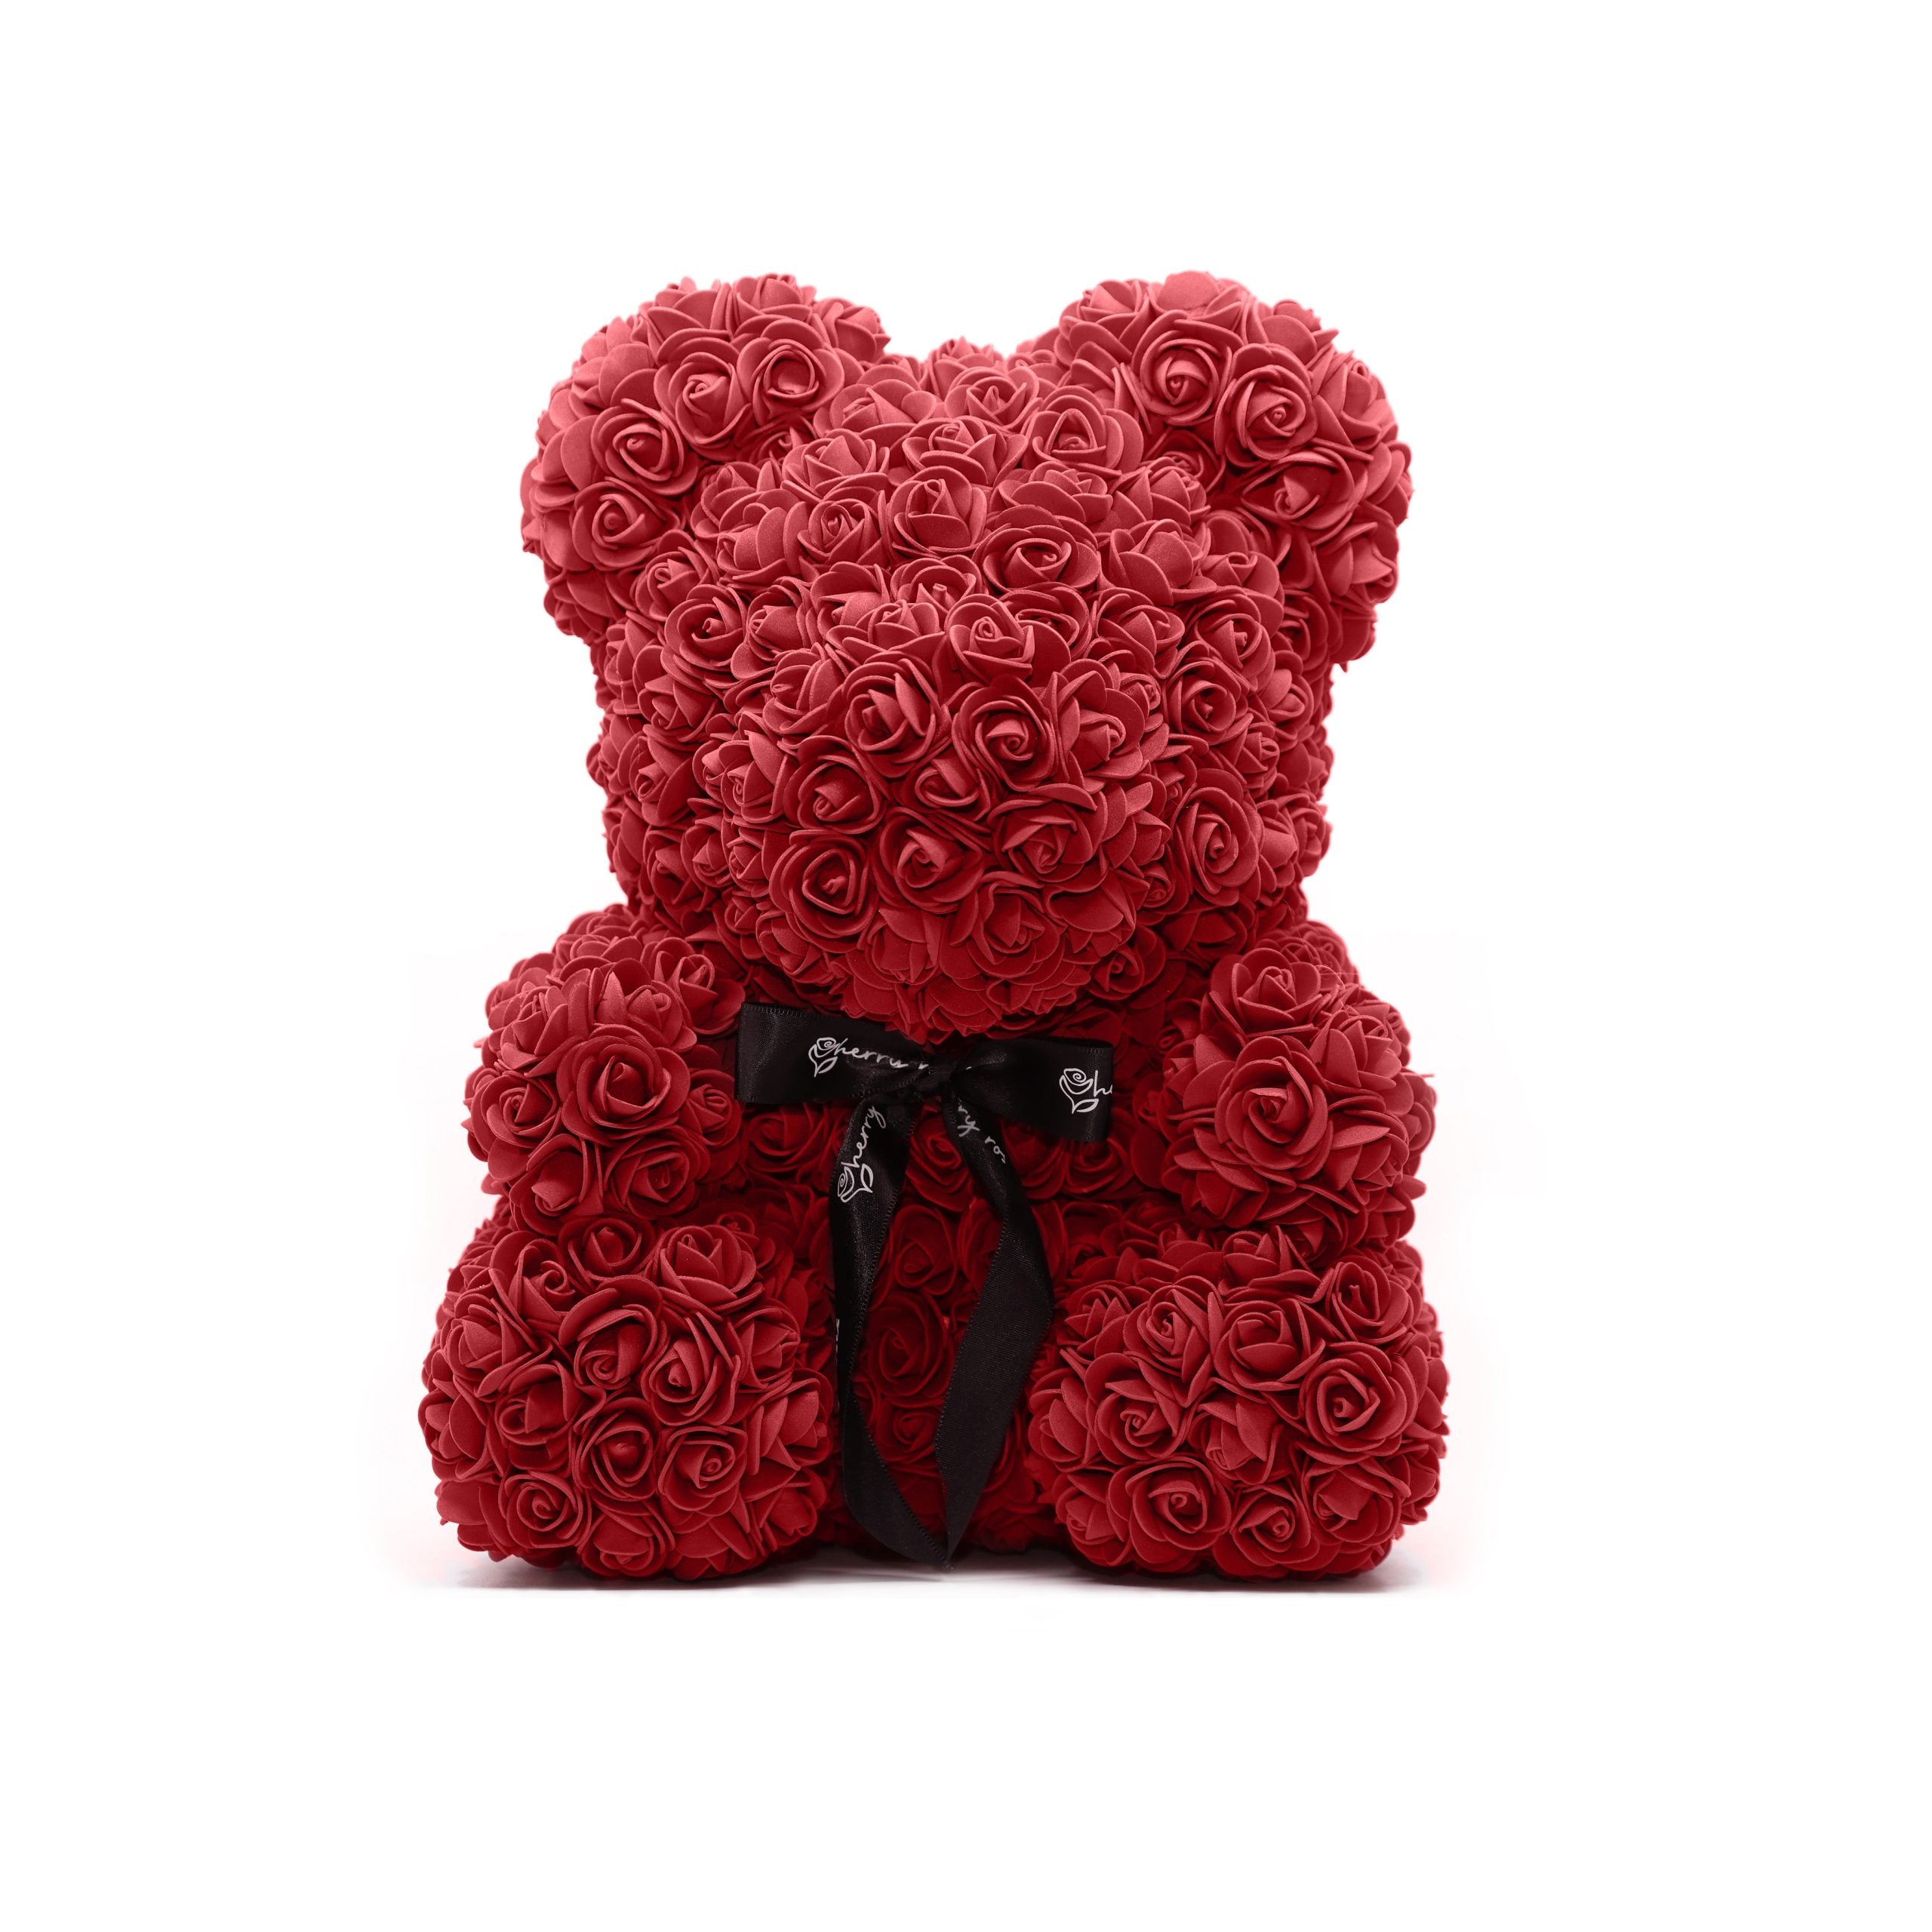 Sherry Medium Antique Red Rose Bear | 35cm | Gift Box Included